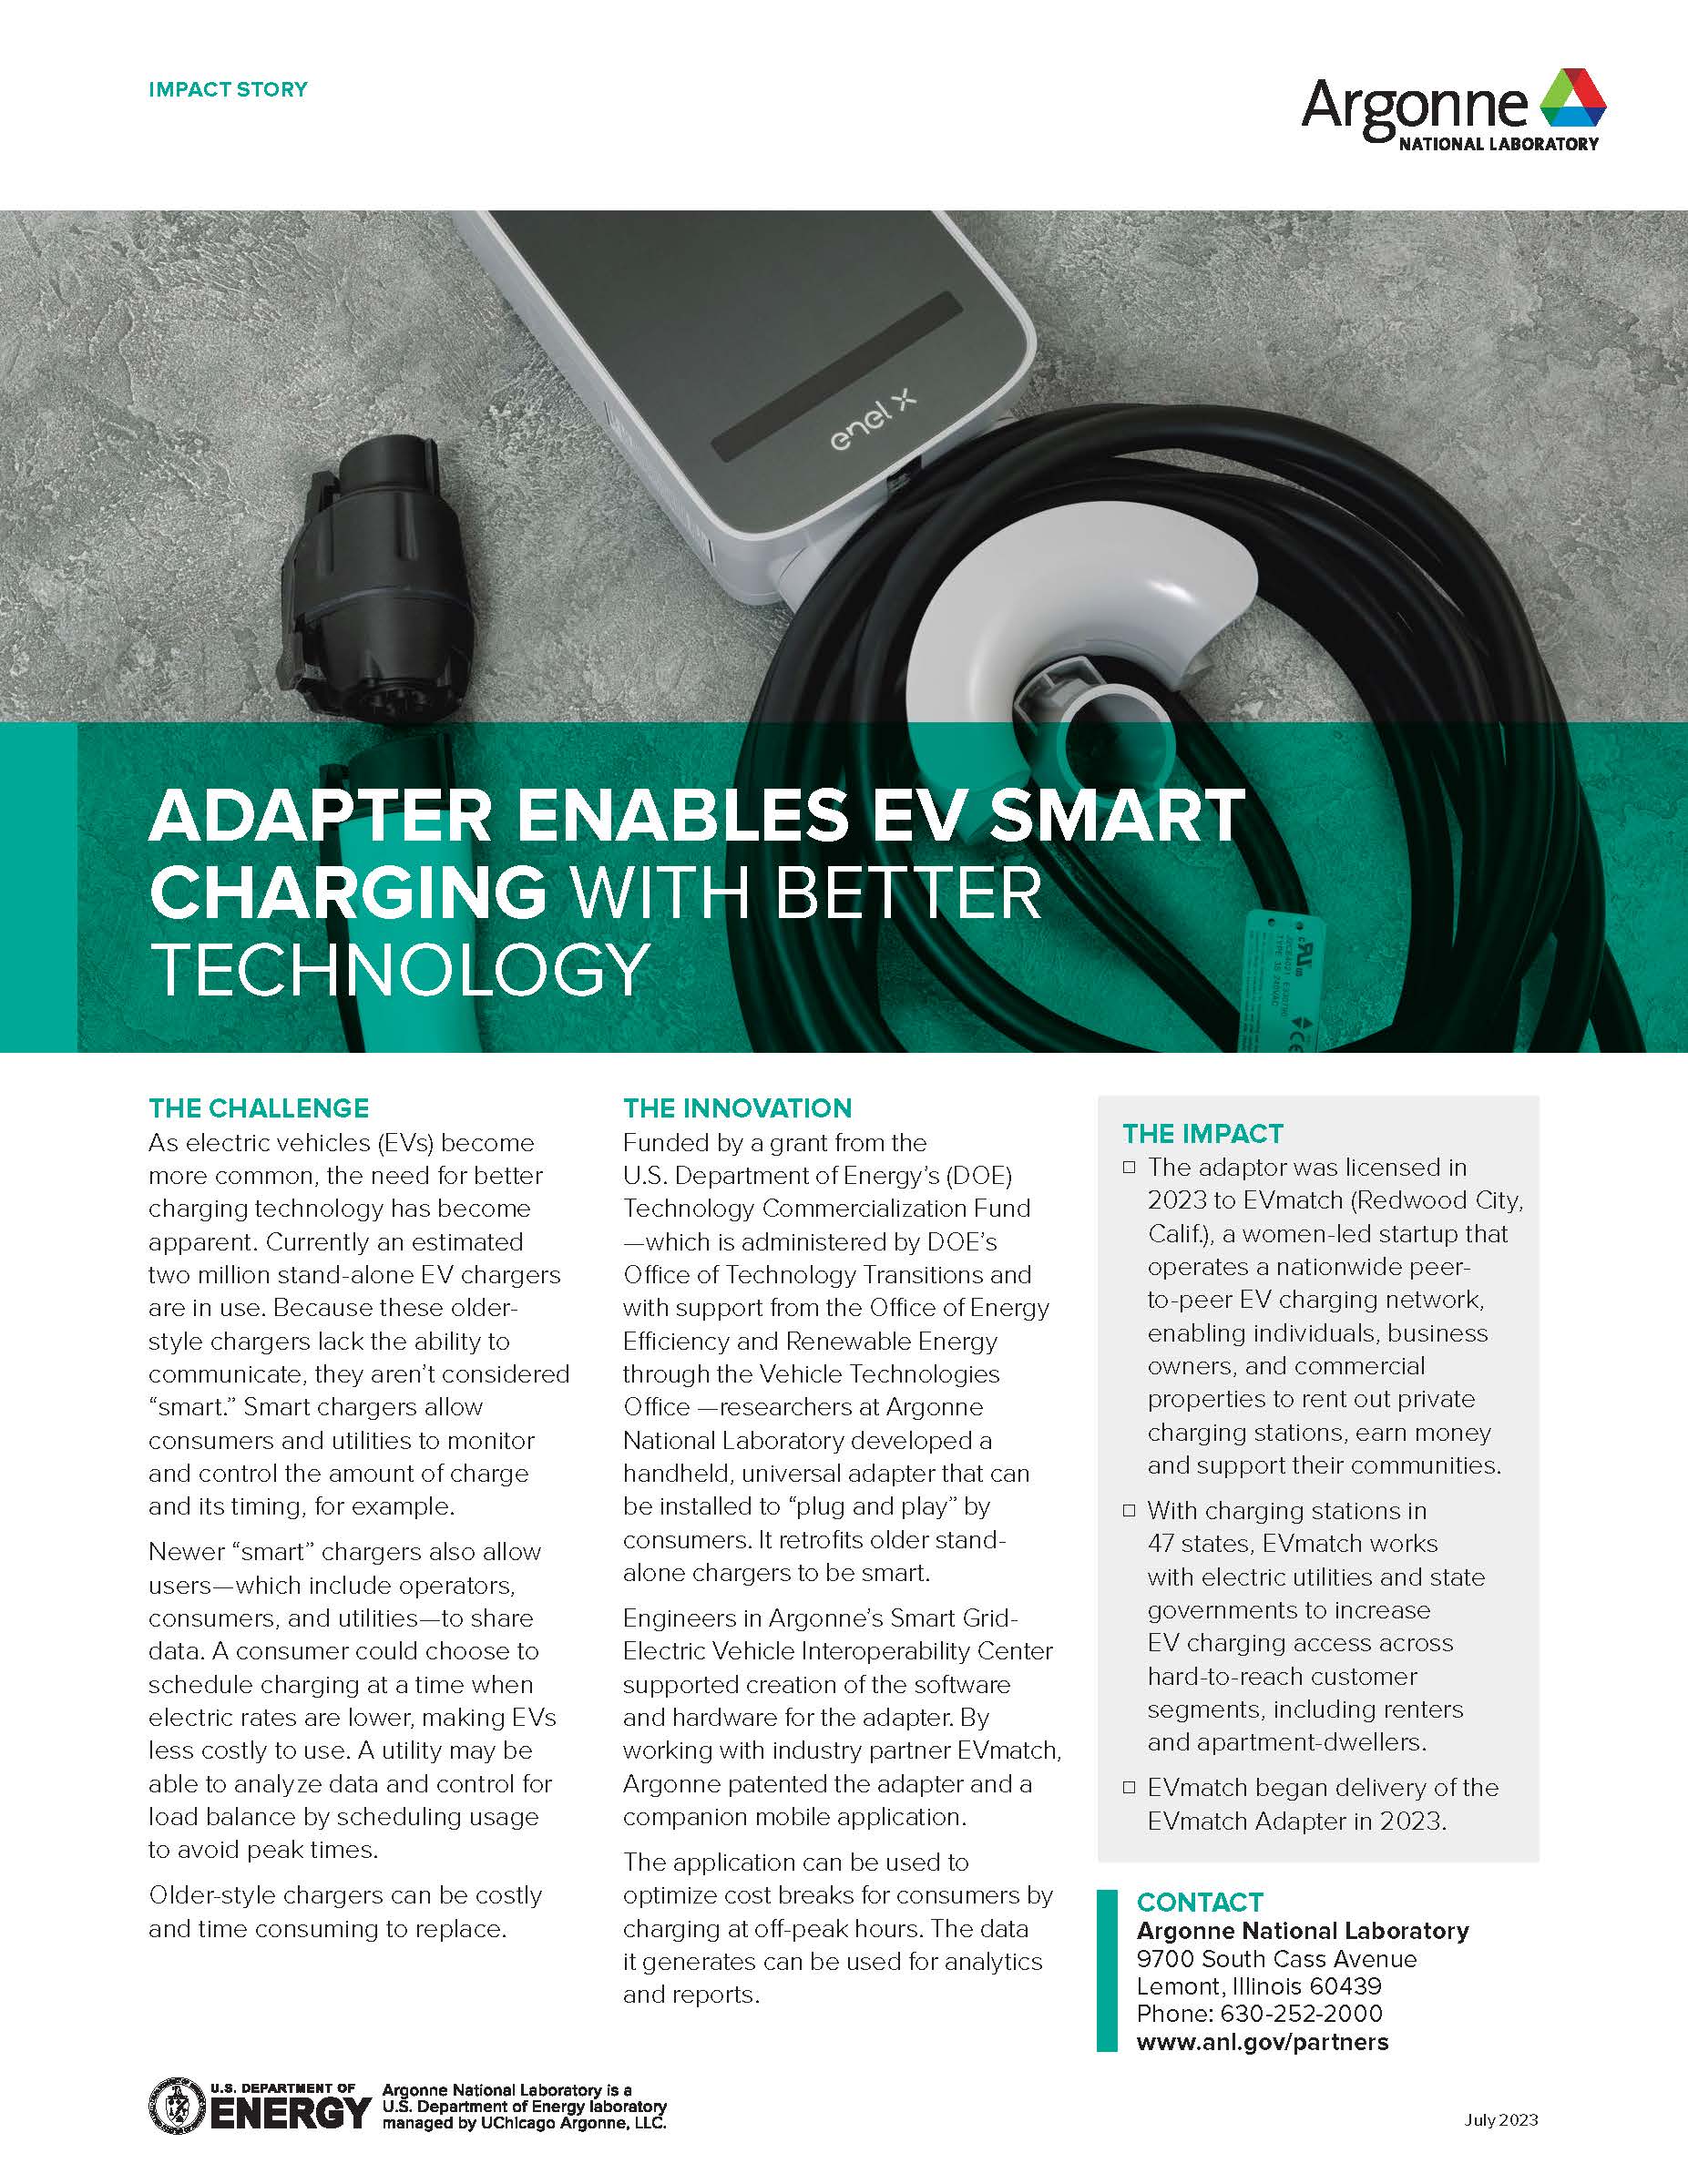 Adapter Enables EV Smart Charging with Better Technology fact sheet for Argonne National Laboratory